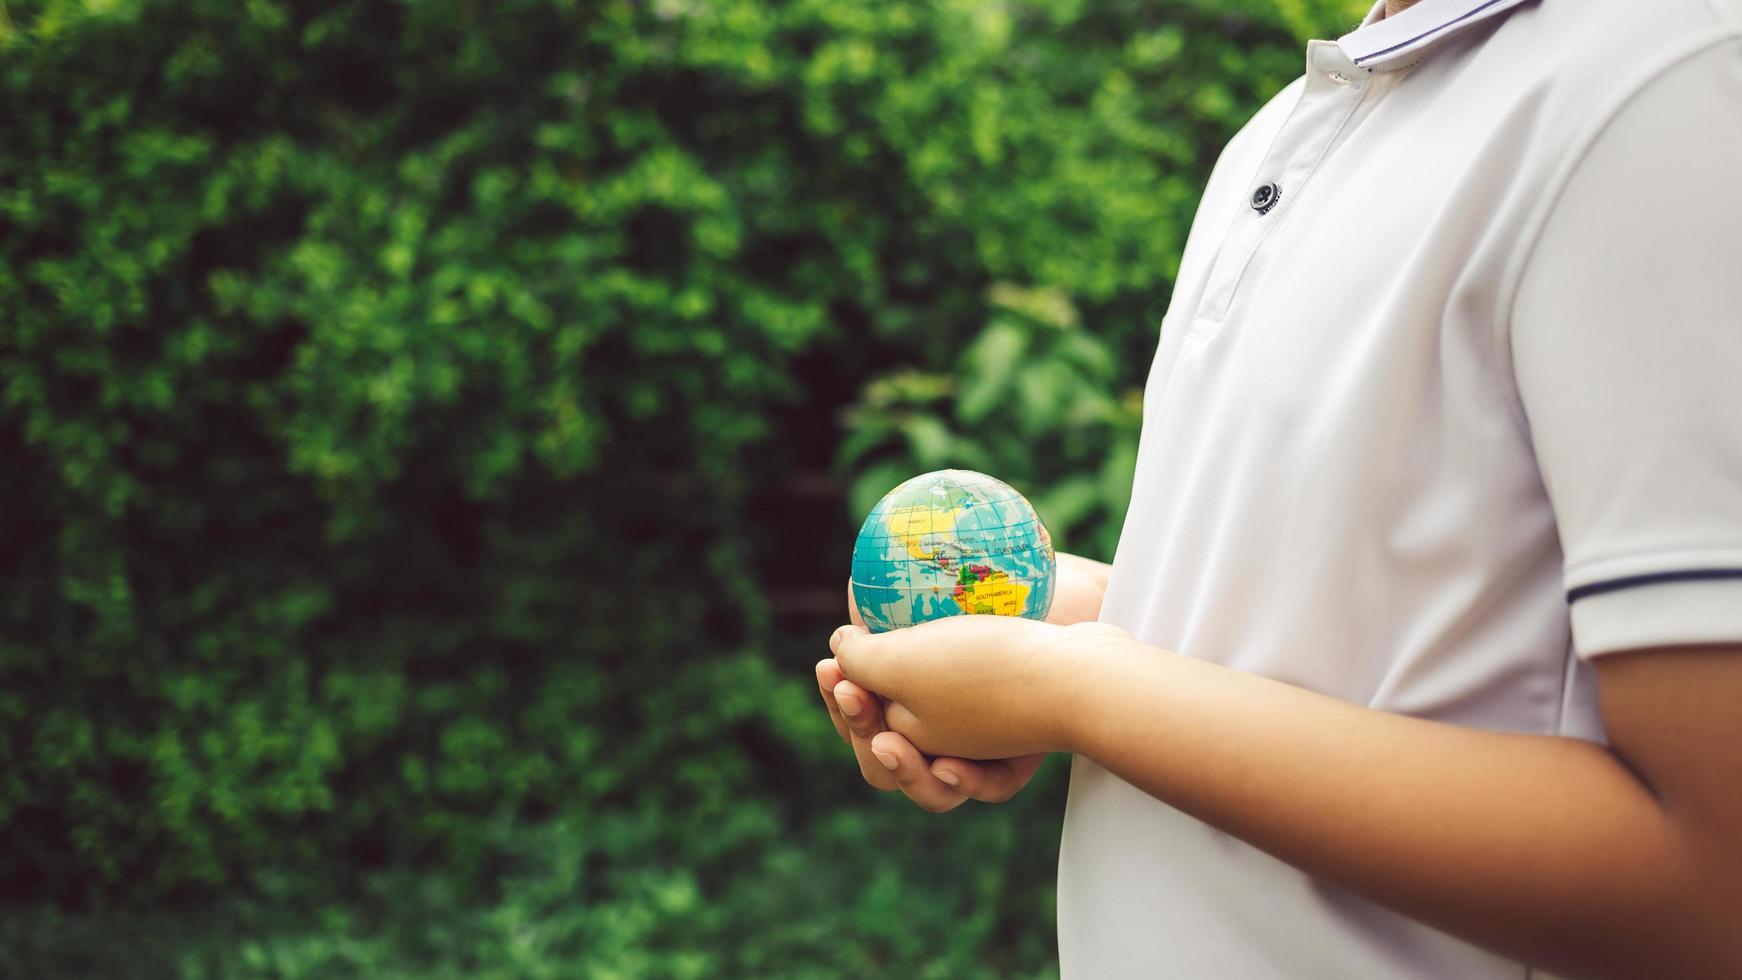 Planet earth in the boy's hands saves and protects the world over blurred green nature background. Environmental concept on Earth Day. photo